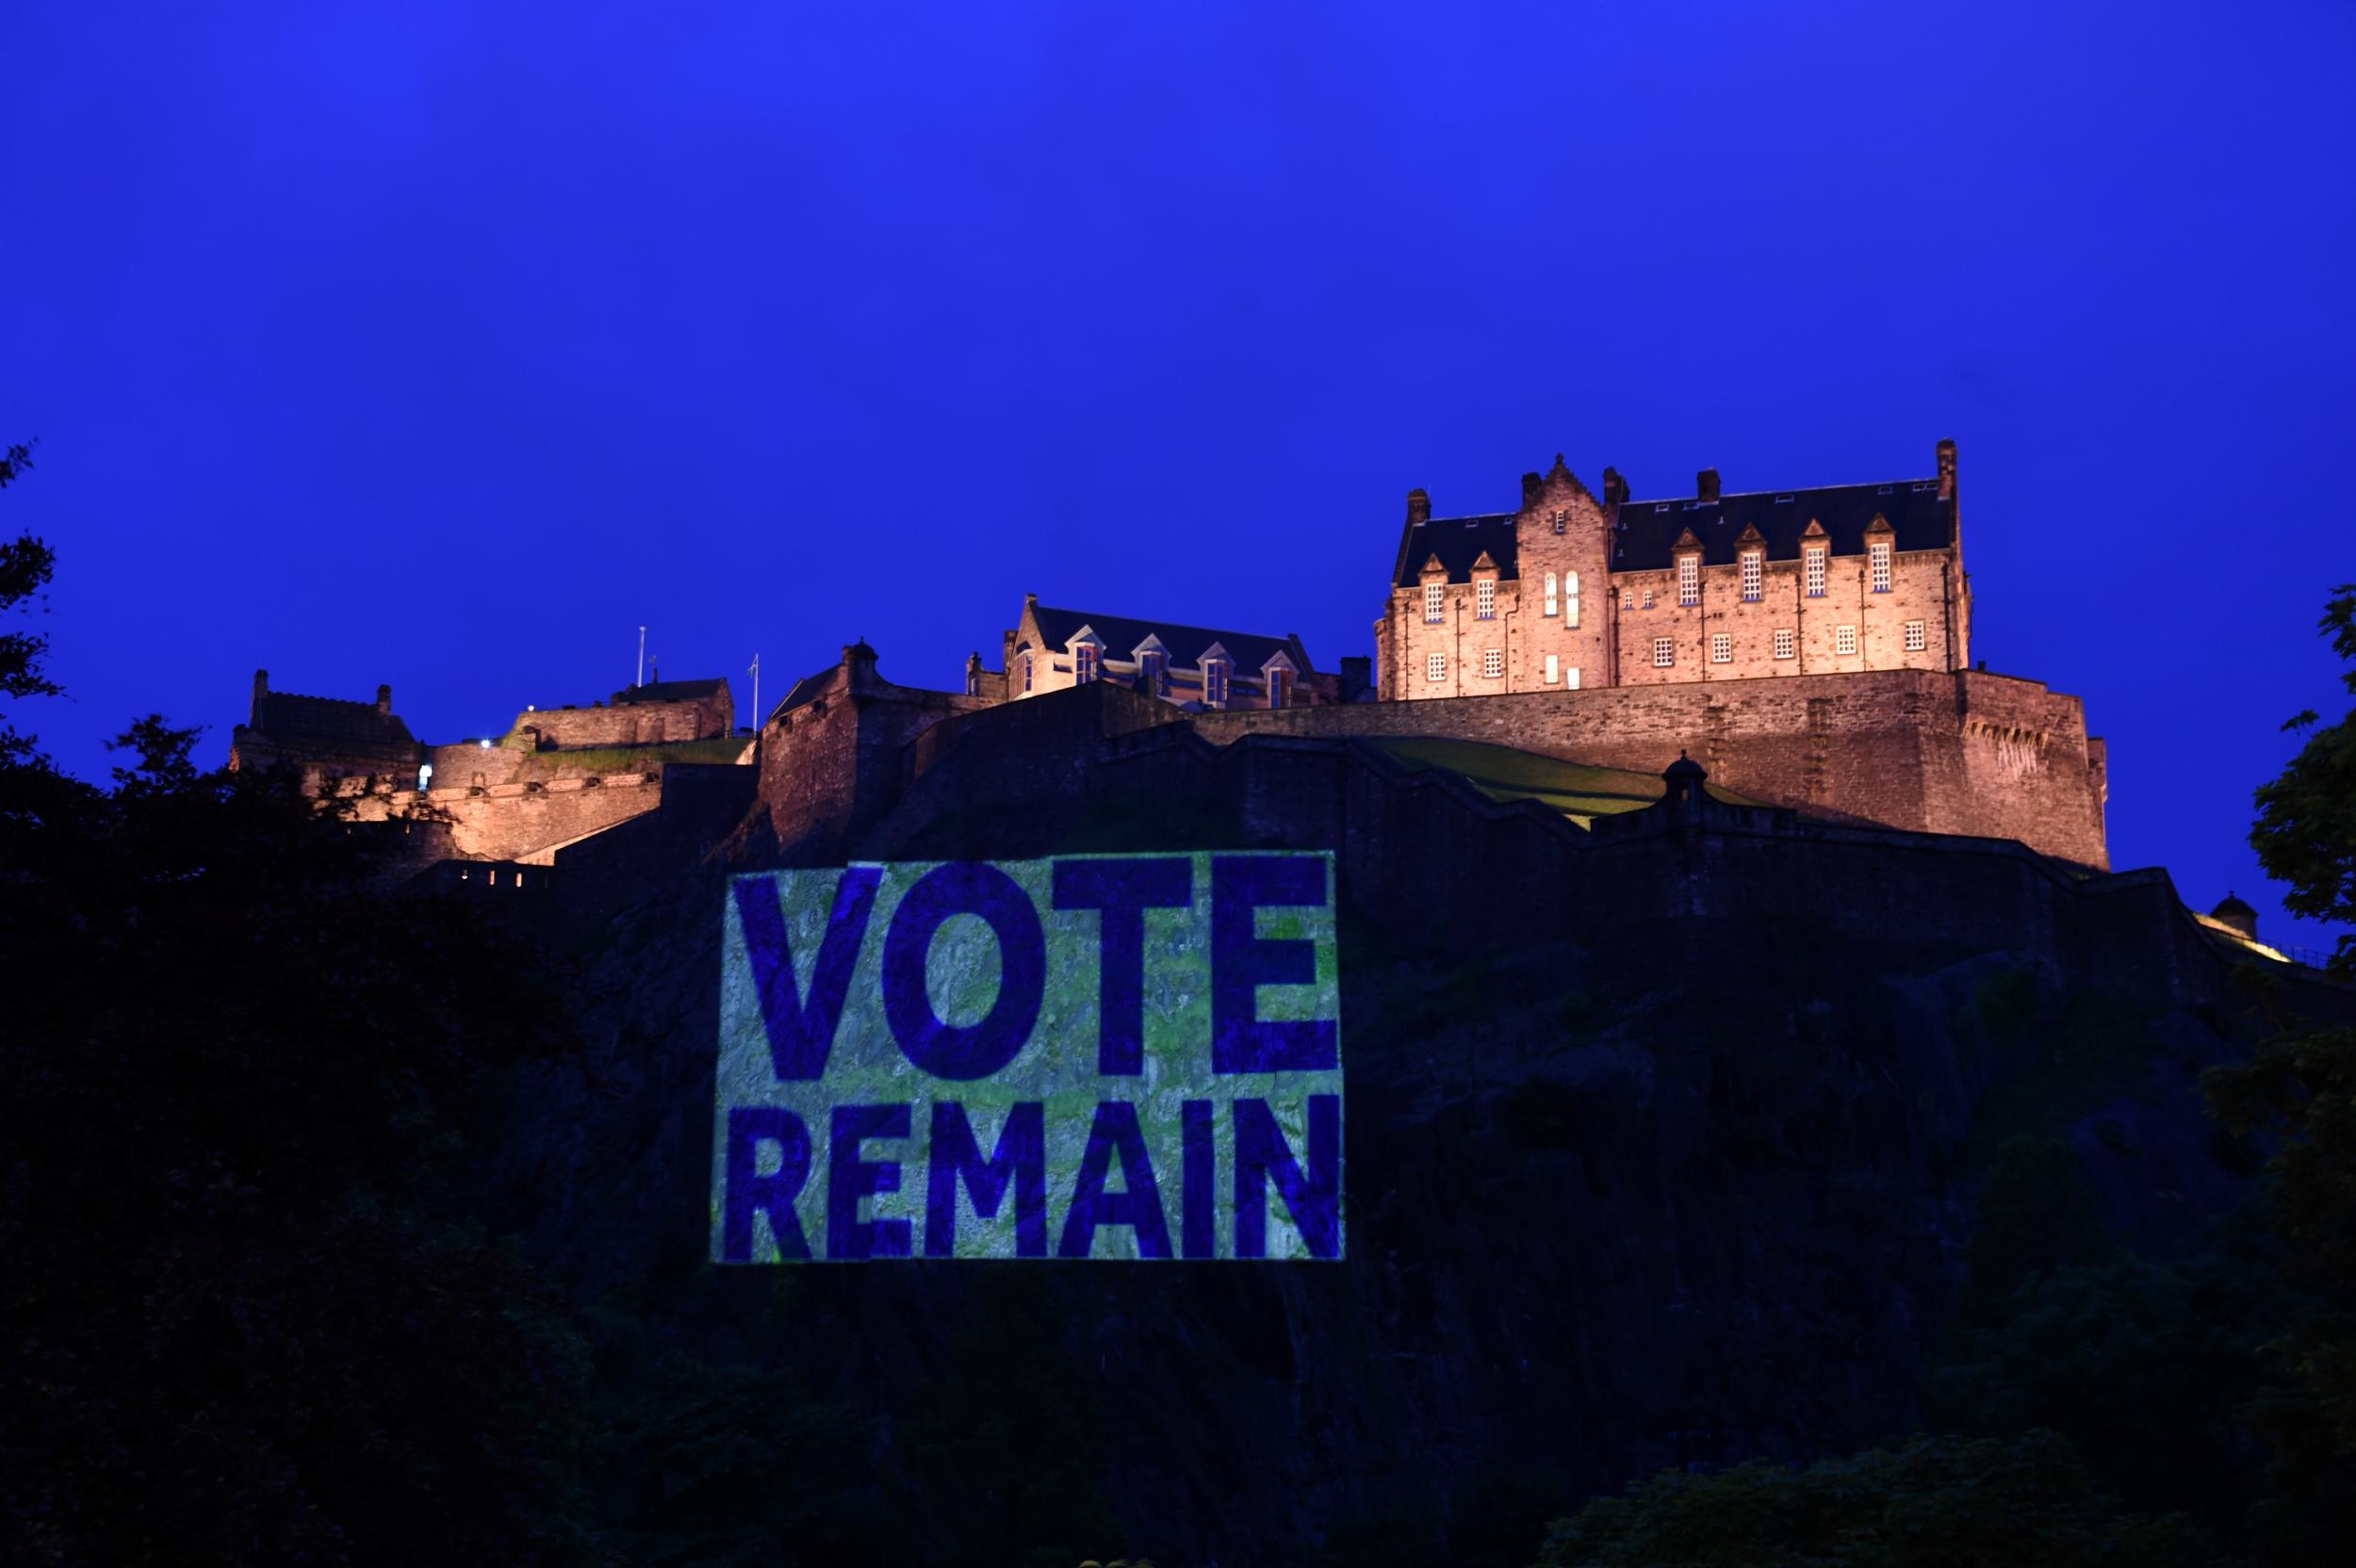 Edinburgh Castle last June: areas that voted to stay in the EU are, perhaps unsurprisingly, finding the ensuing Brexit process the most traumatic